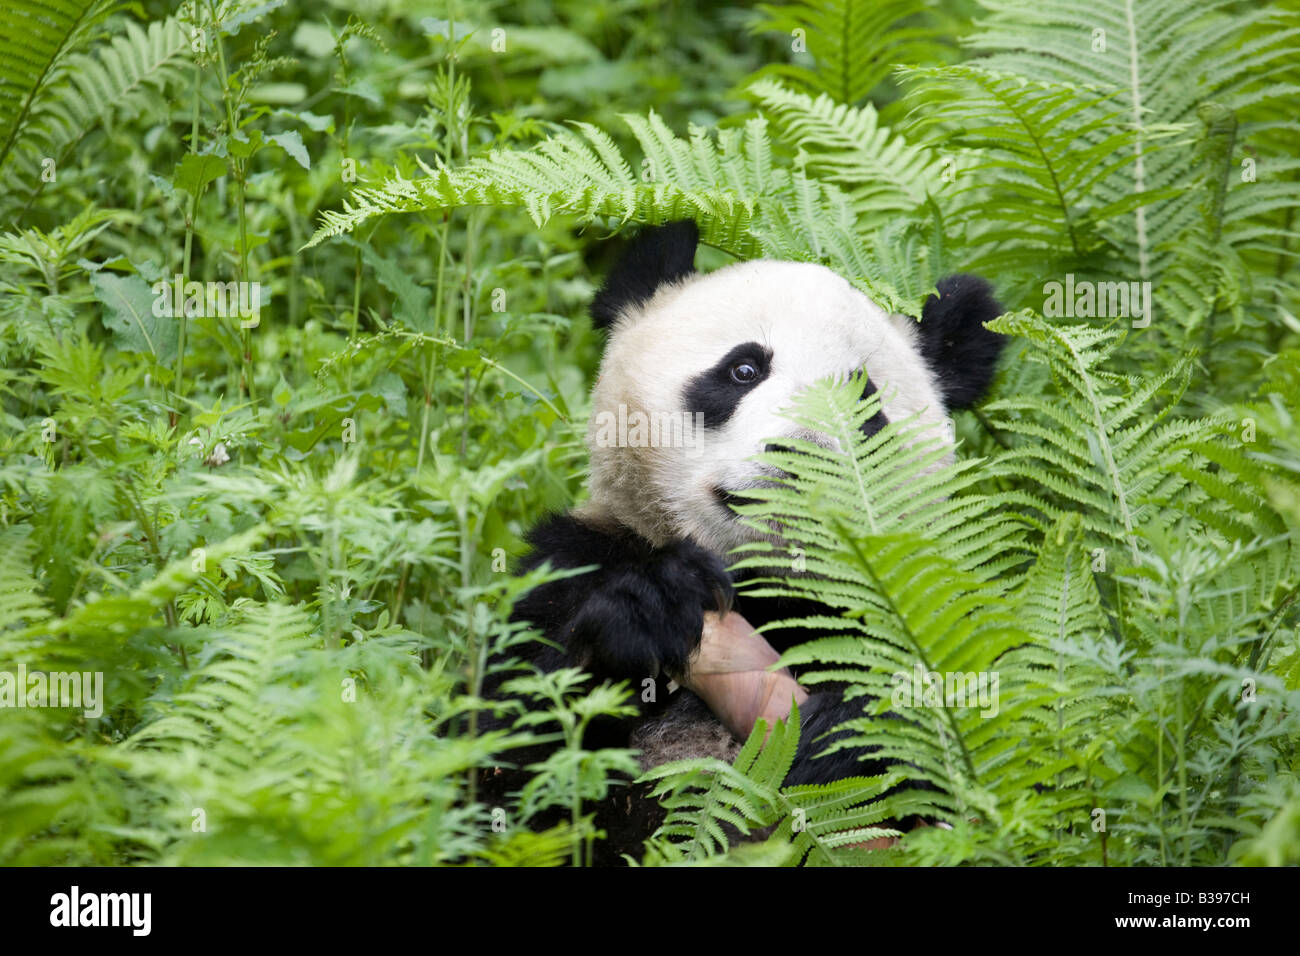 Giant Panda peering out from ferns, holding a piece of bamboo that the animal is eating in Wolong, Sichuan Province, China. Close up. Stock Photo